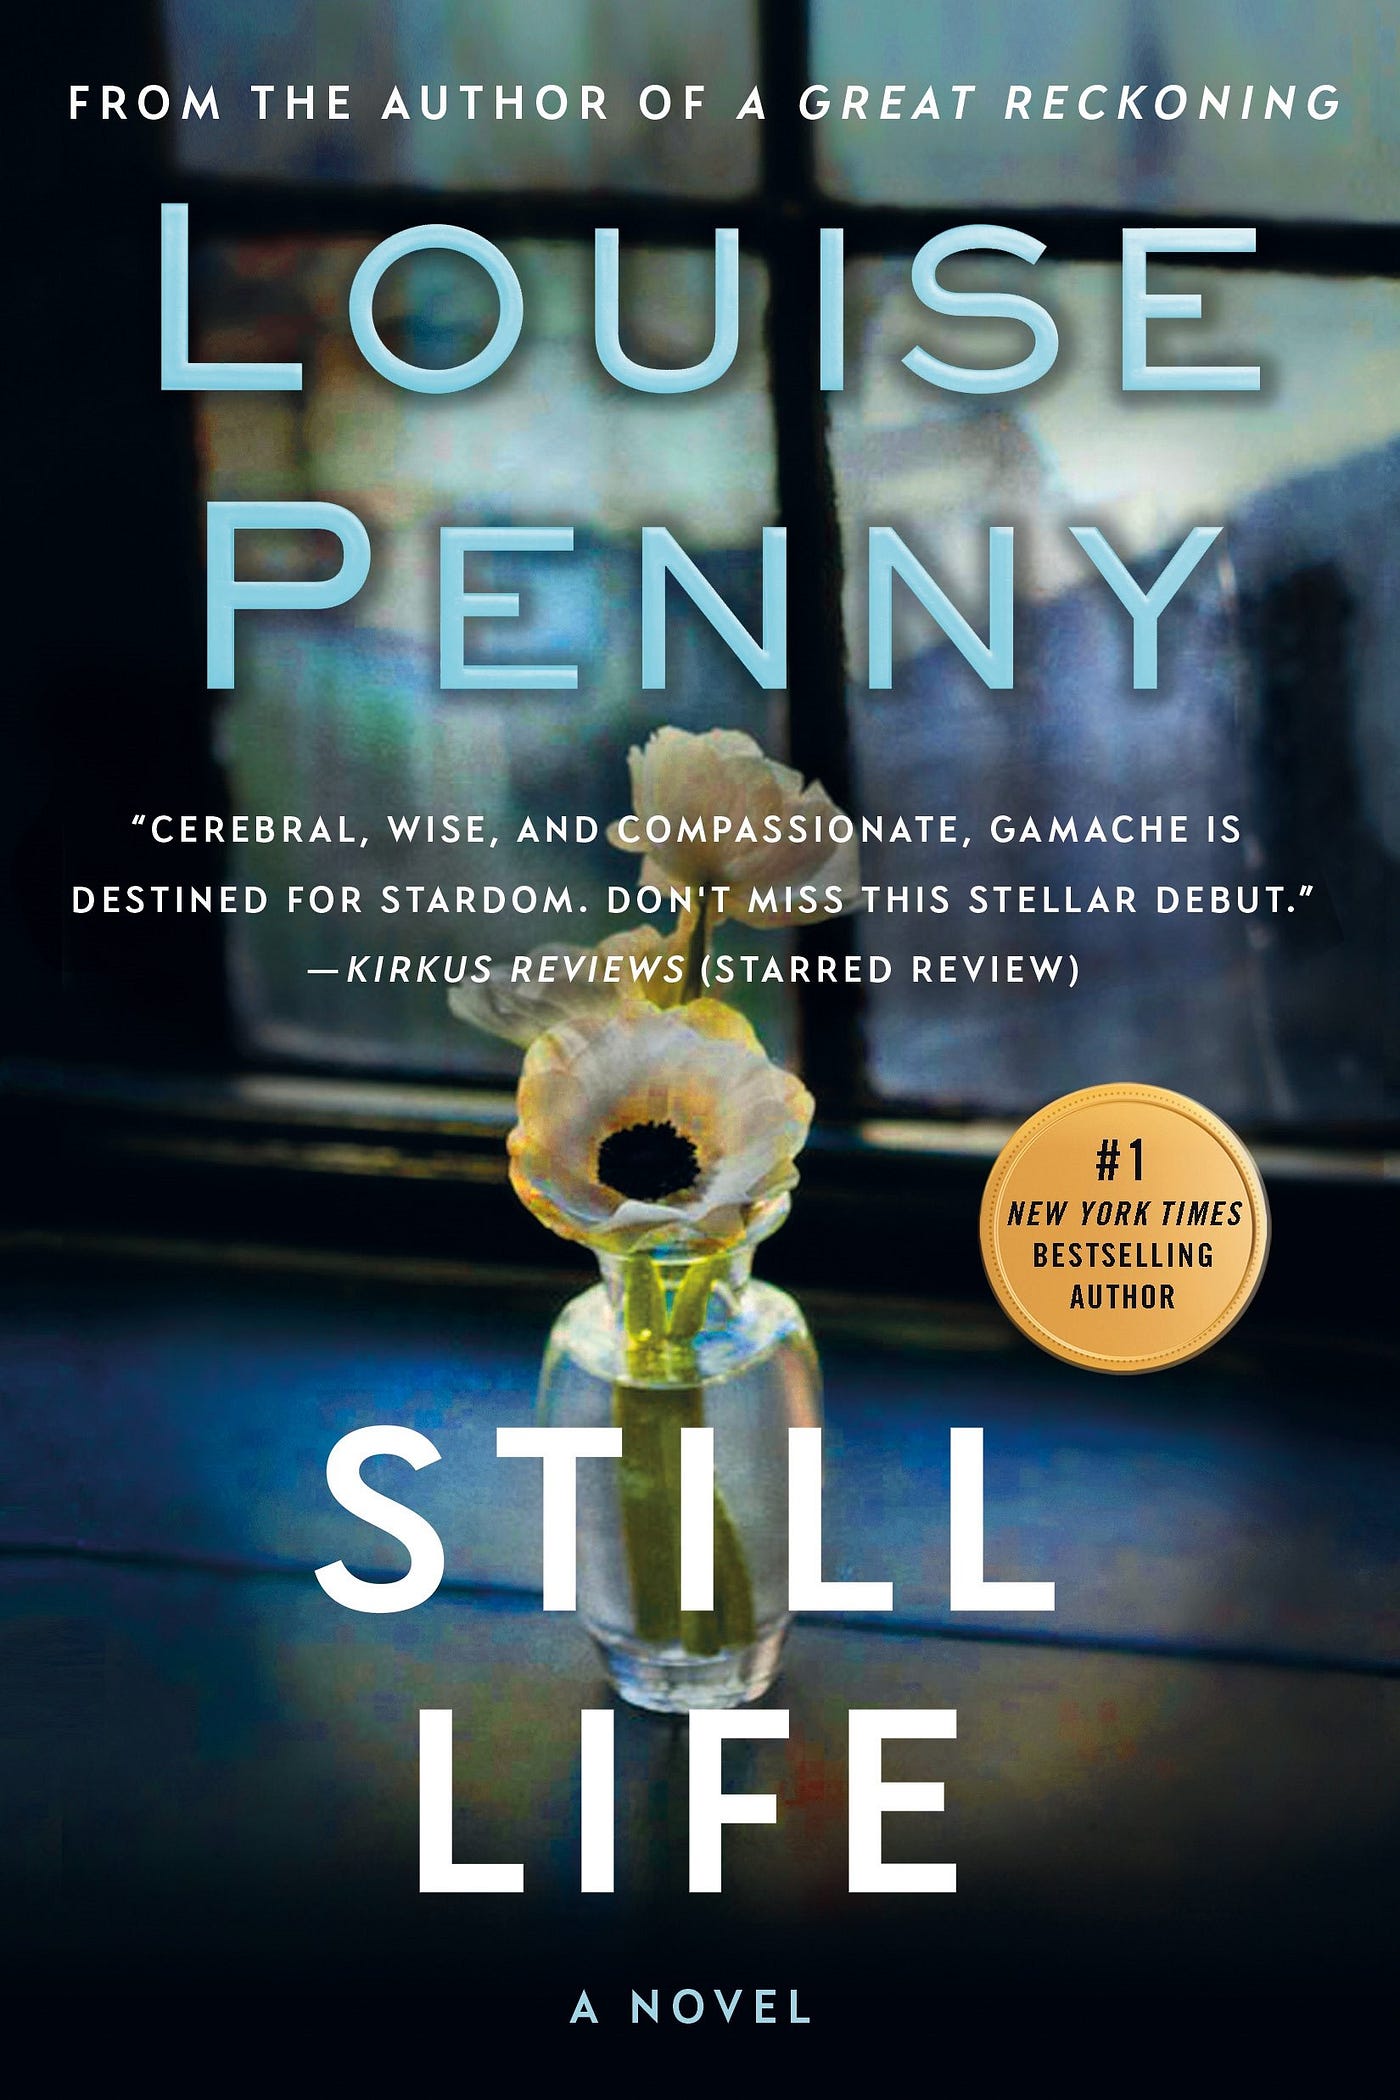 Louise Penny Books in Chronological Order - With Summaries